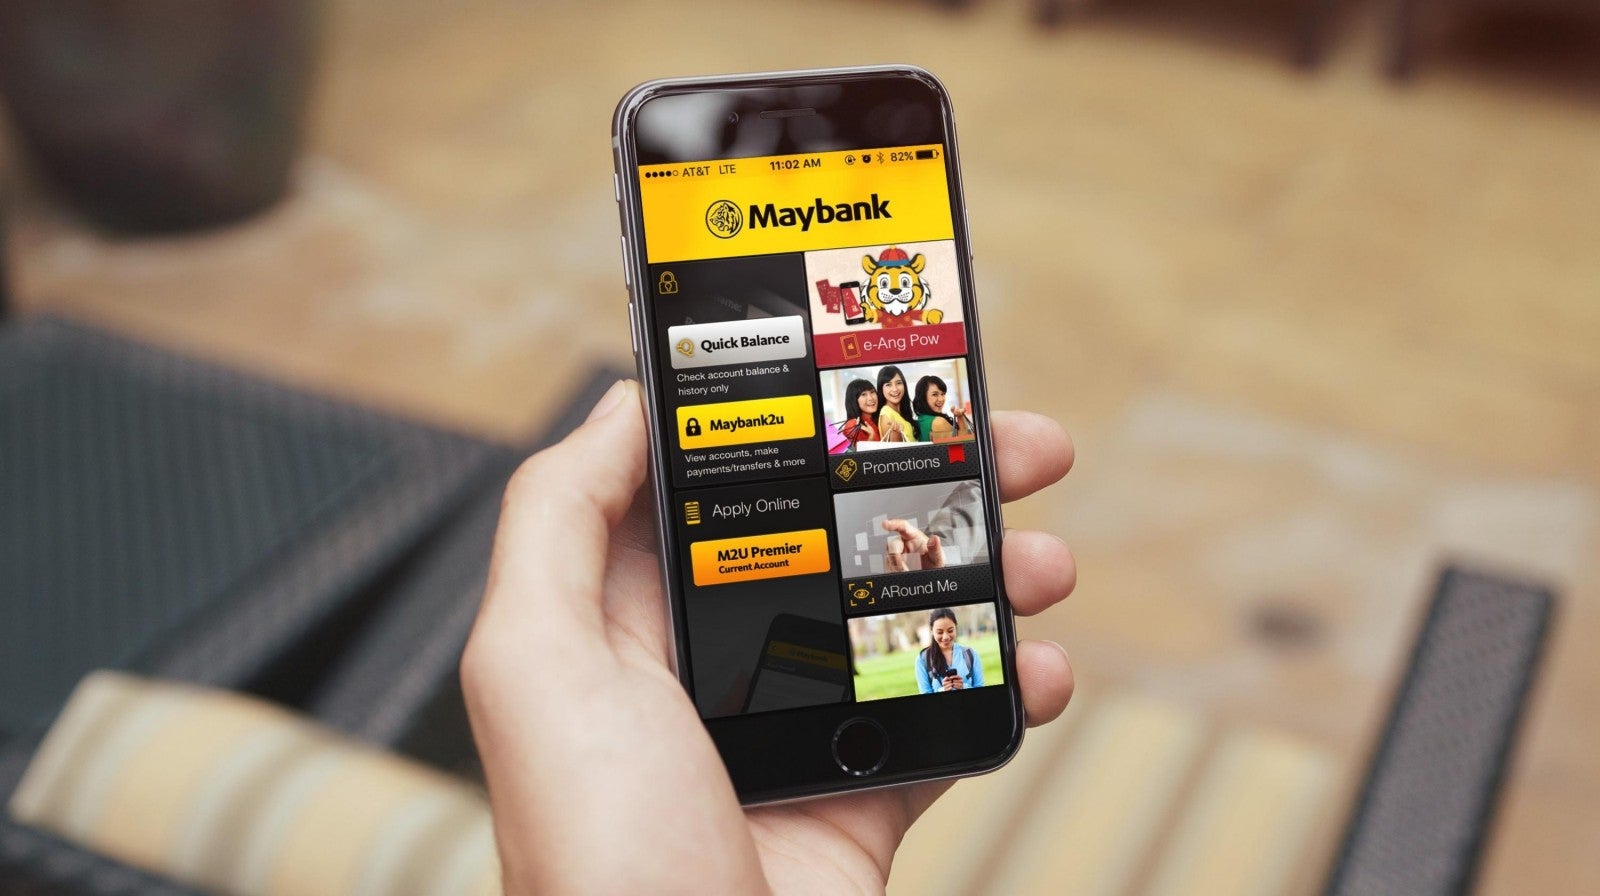 Starting 22 Jan, There'll Be No More SMS TAC For Maybank App Users - WORLD OF BUZZ 1